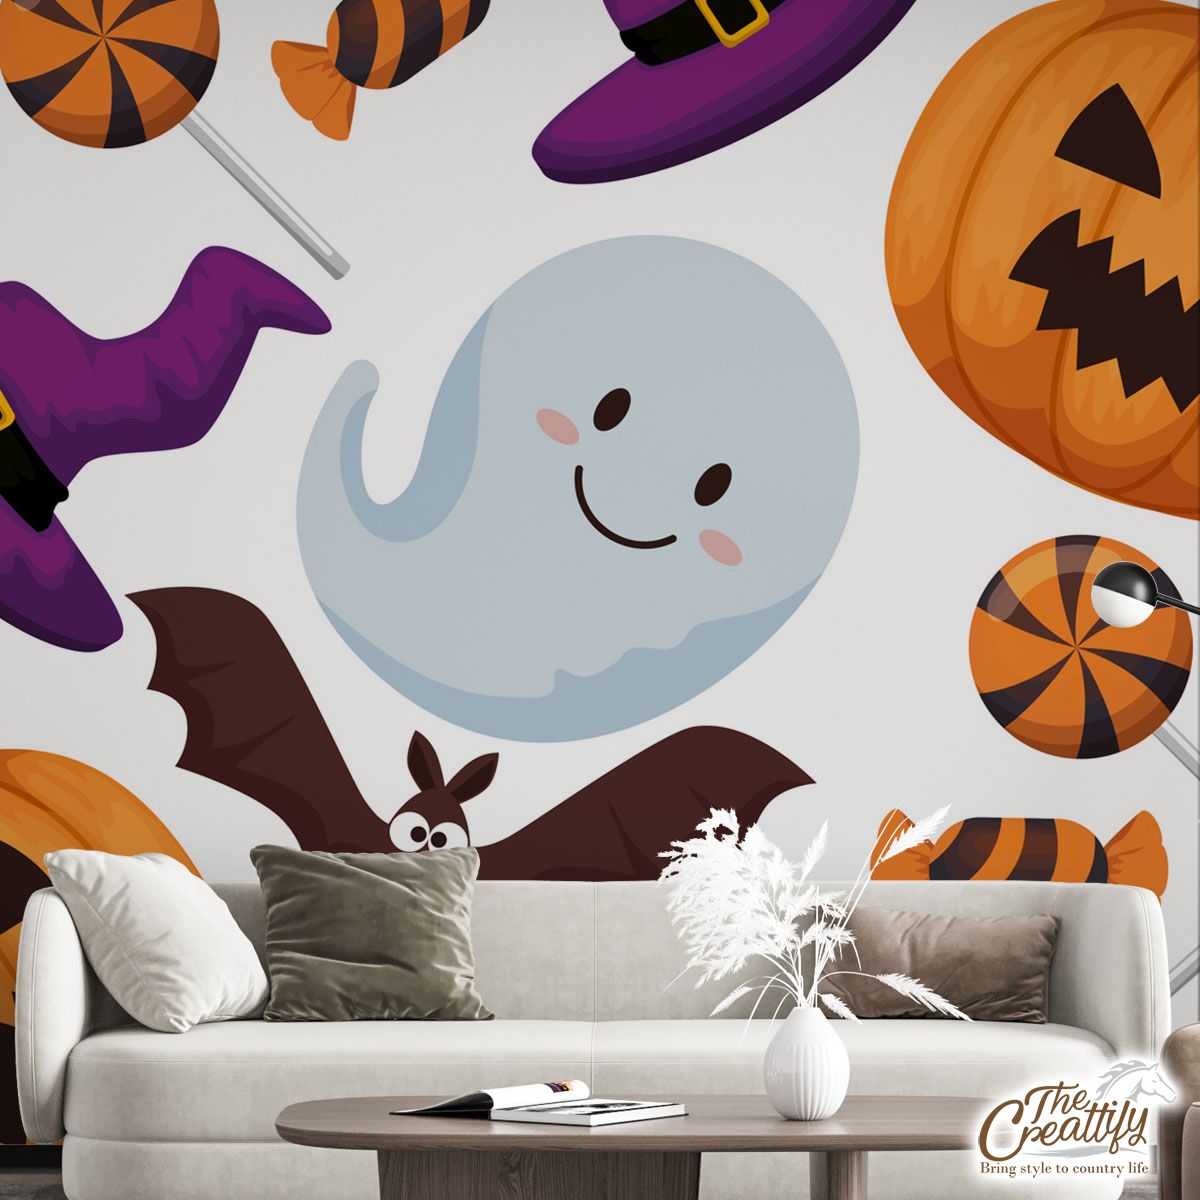 Happy Halloween With Cartoon Bat, Cute Ghost, Scary Pumpkin Face And Halloween Candy Wall Mural